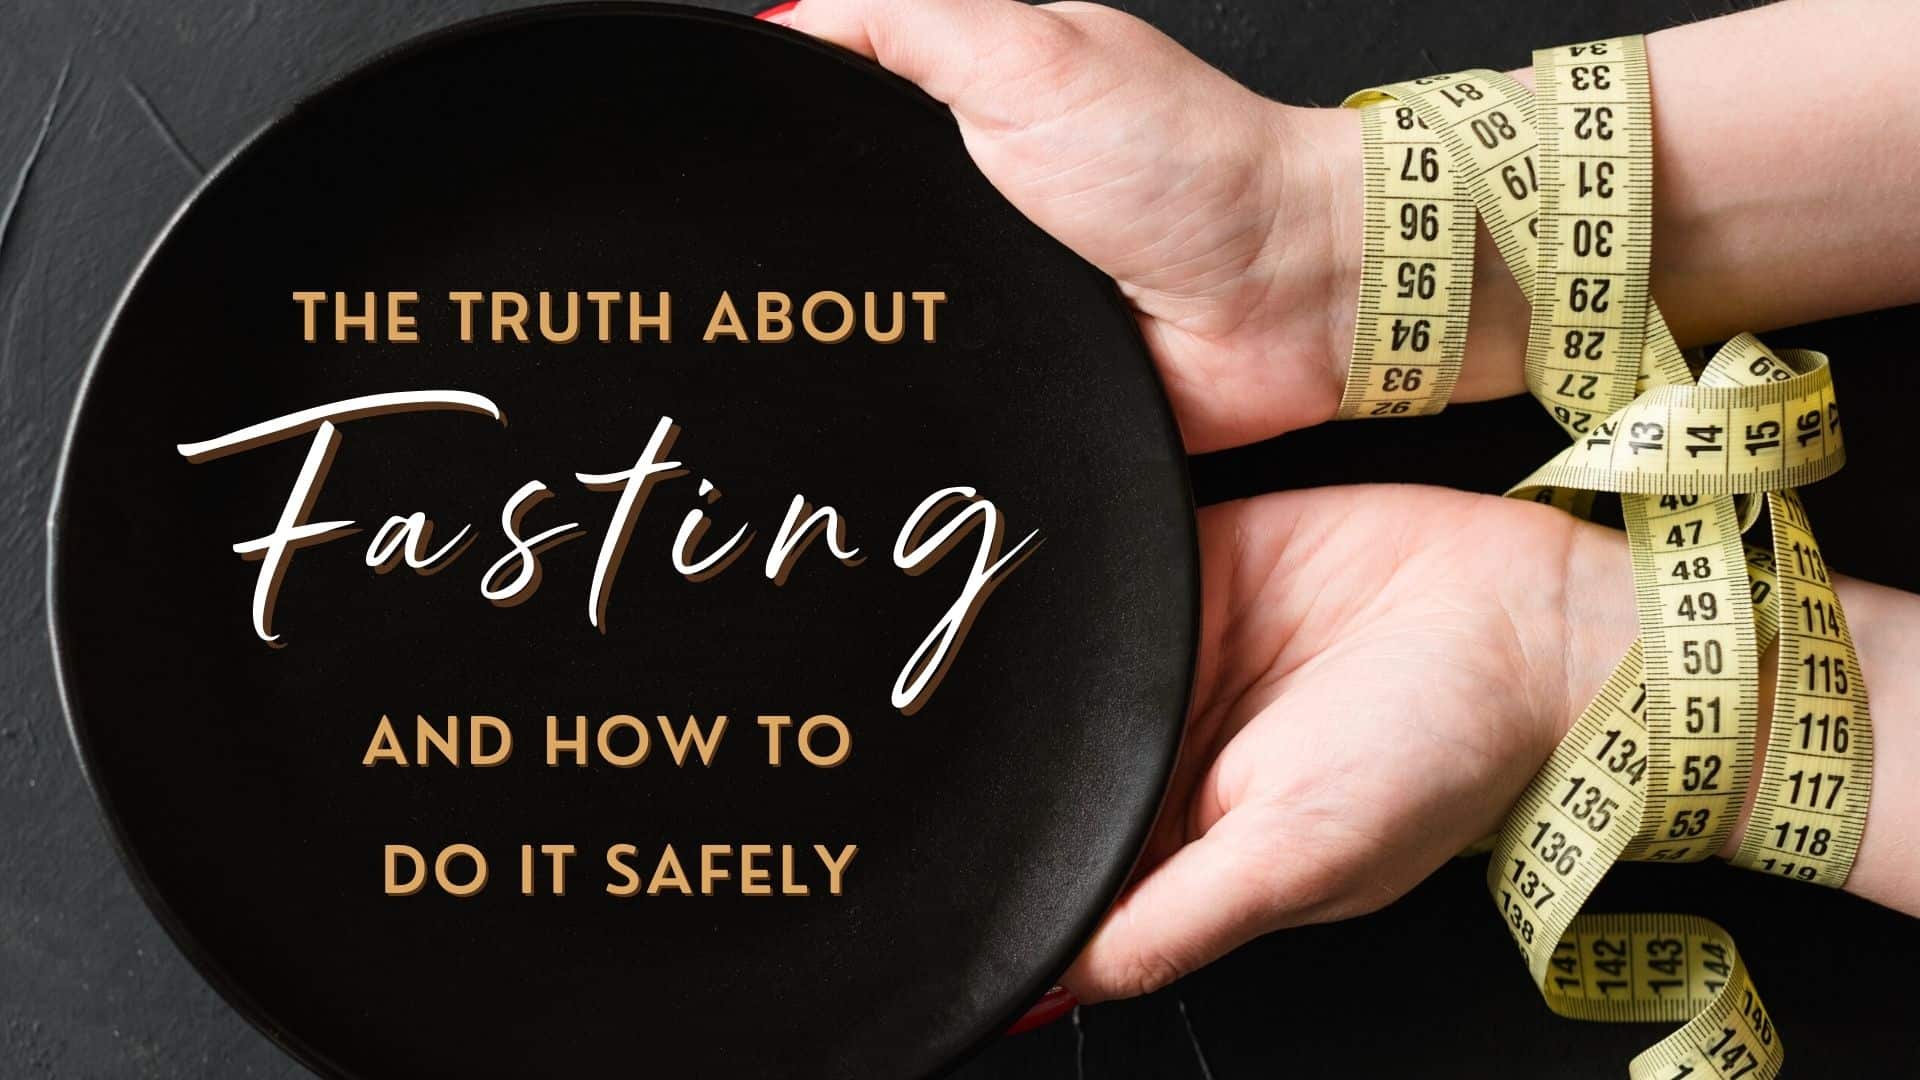 rigid diet fasting weightloss hands tied with measuring tape holding a black empty plate